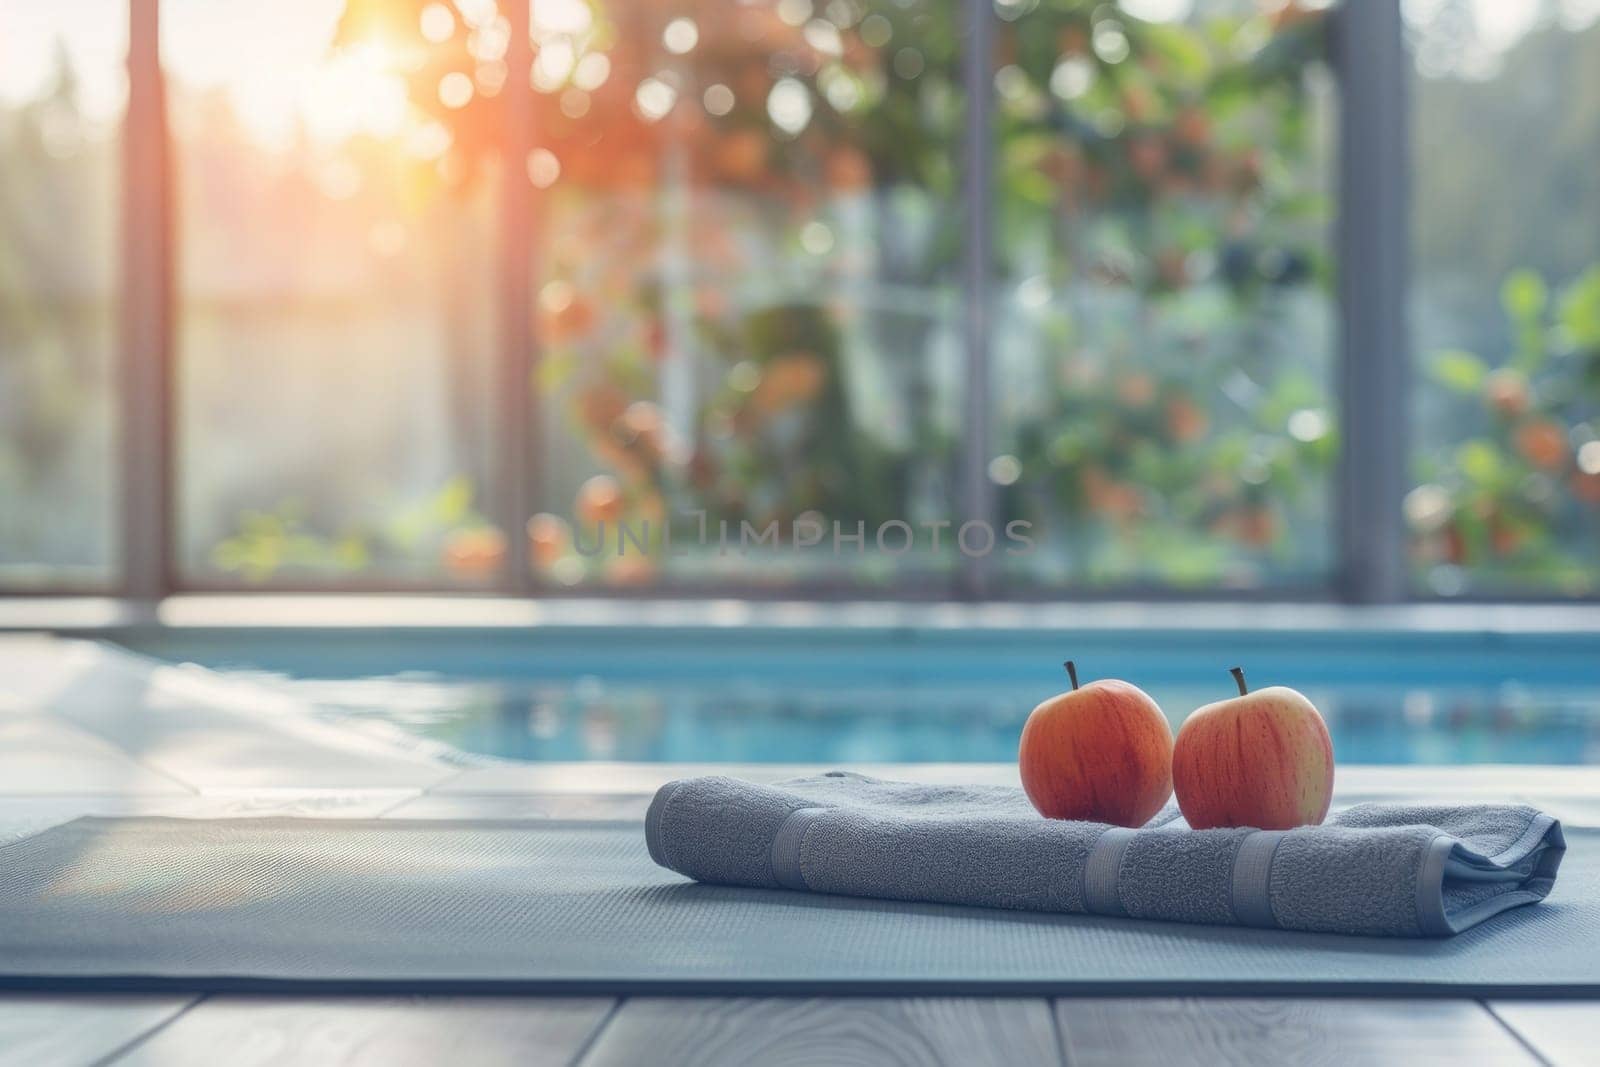 Lifestyle Wellness concept, a towel is on the ground next to two apples by golfmerrymaker